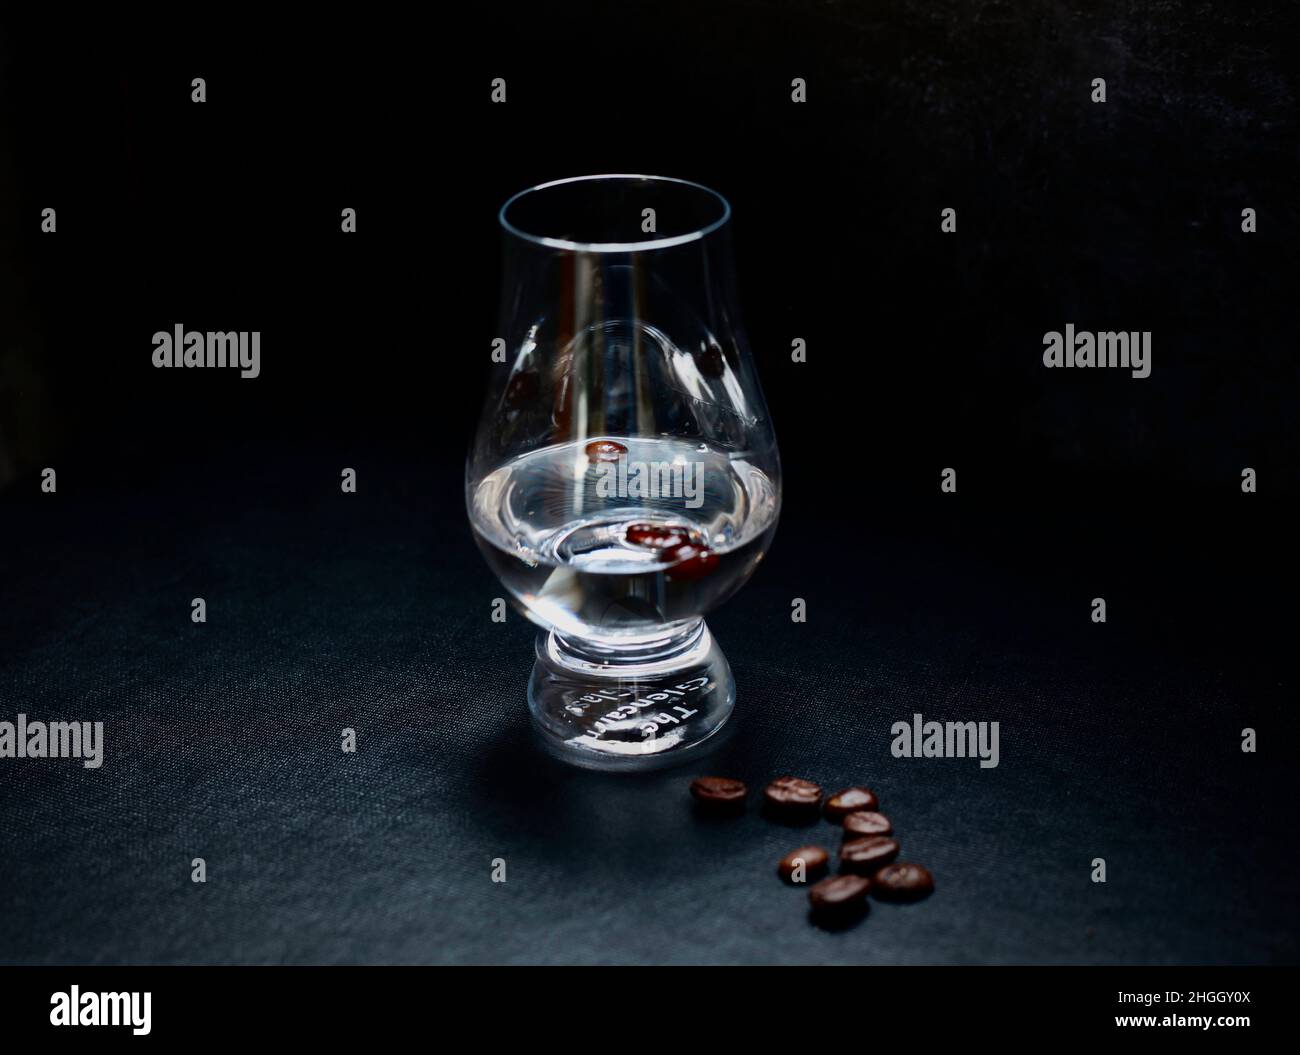 Chiaroscuro image of Sambuca in a simple glass with coffee beans . Dark background with space around and a handful of coffee beans in the foreground. Stock Photo